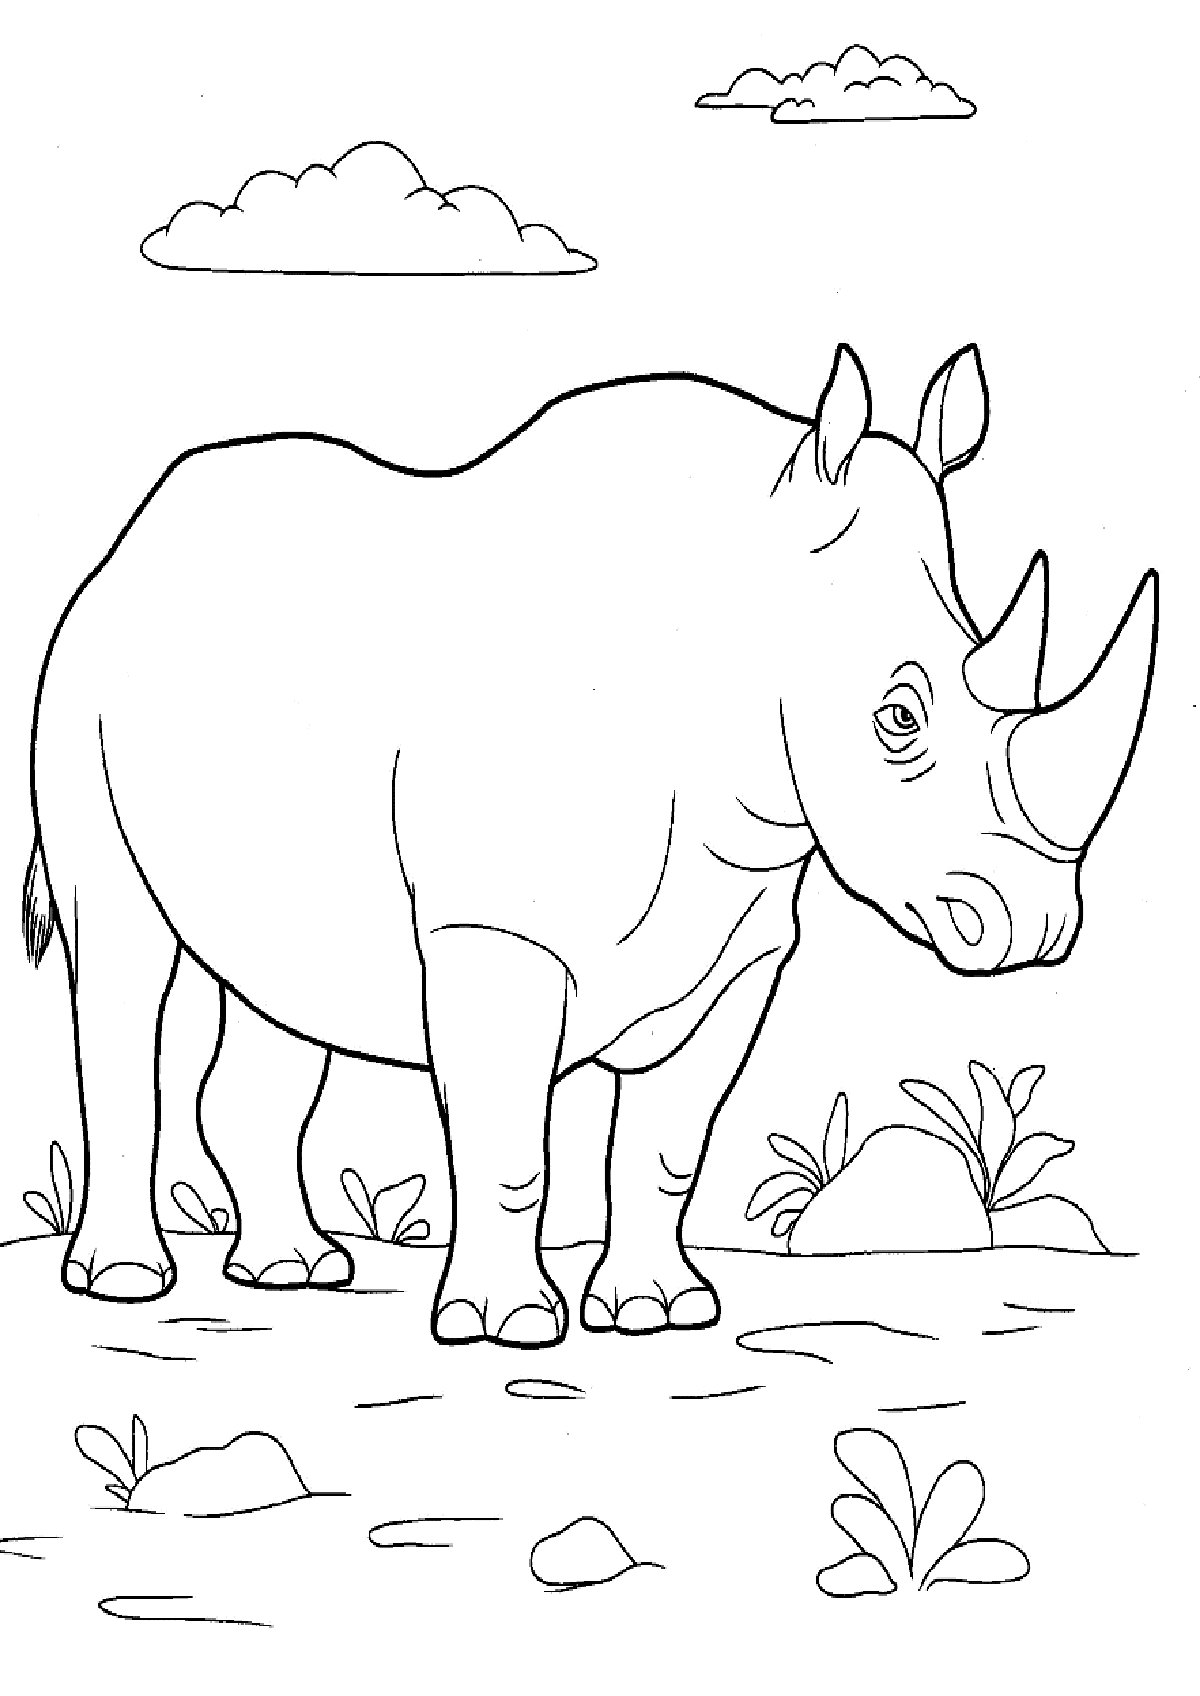 Rhinoceros Coloring Pages to download and print for free